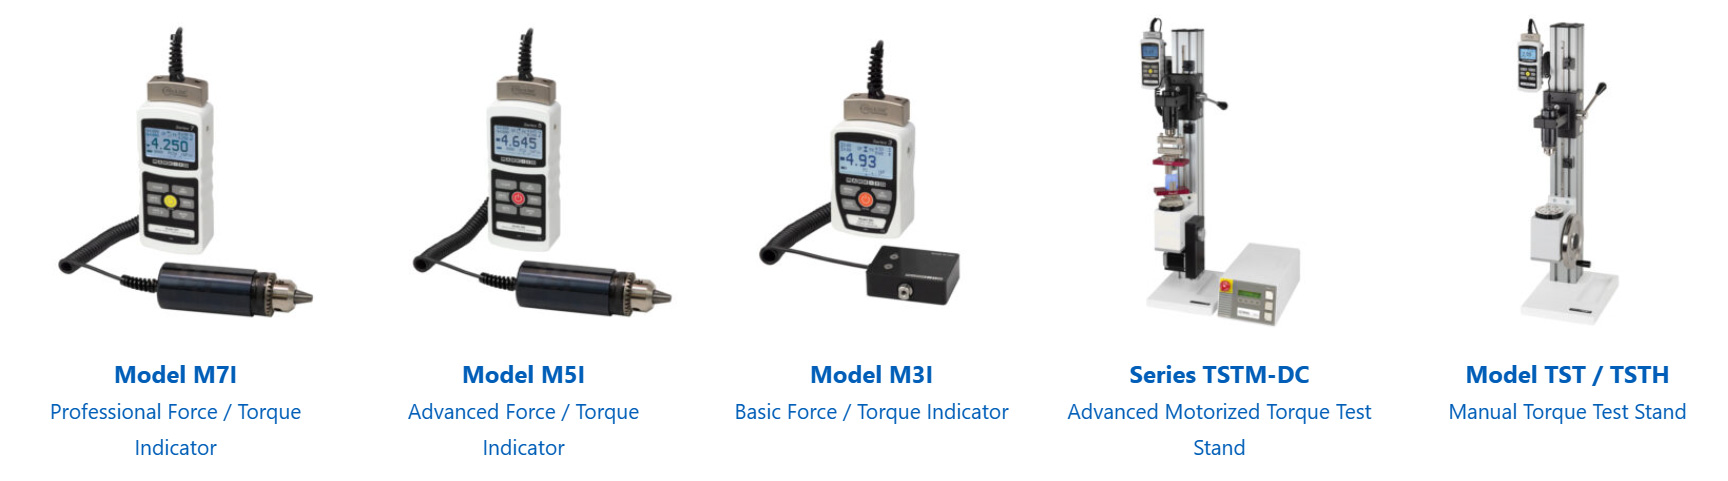 Related Products of MR51 Torque Sensors